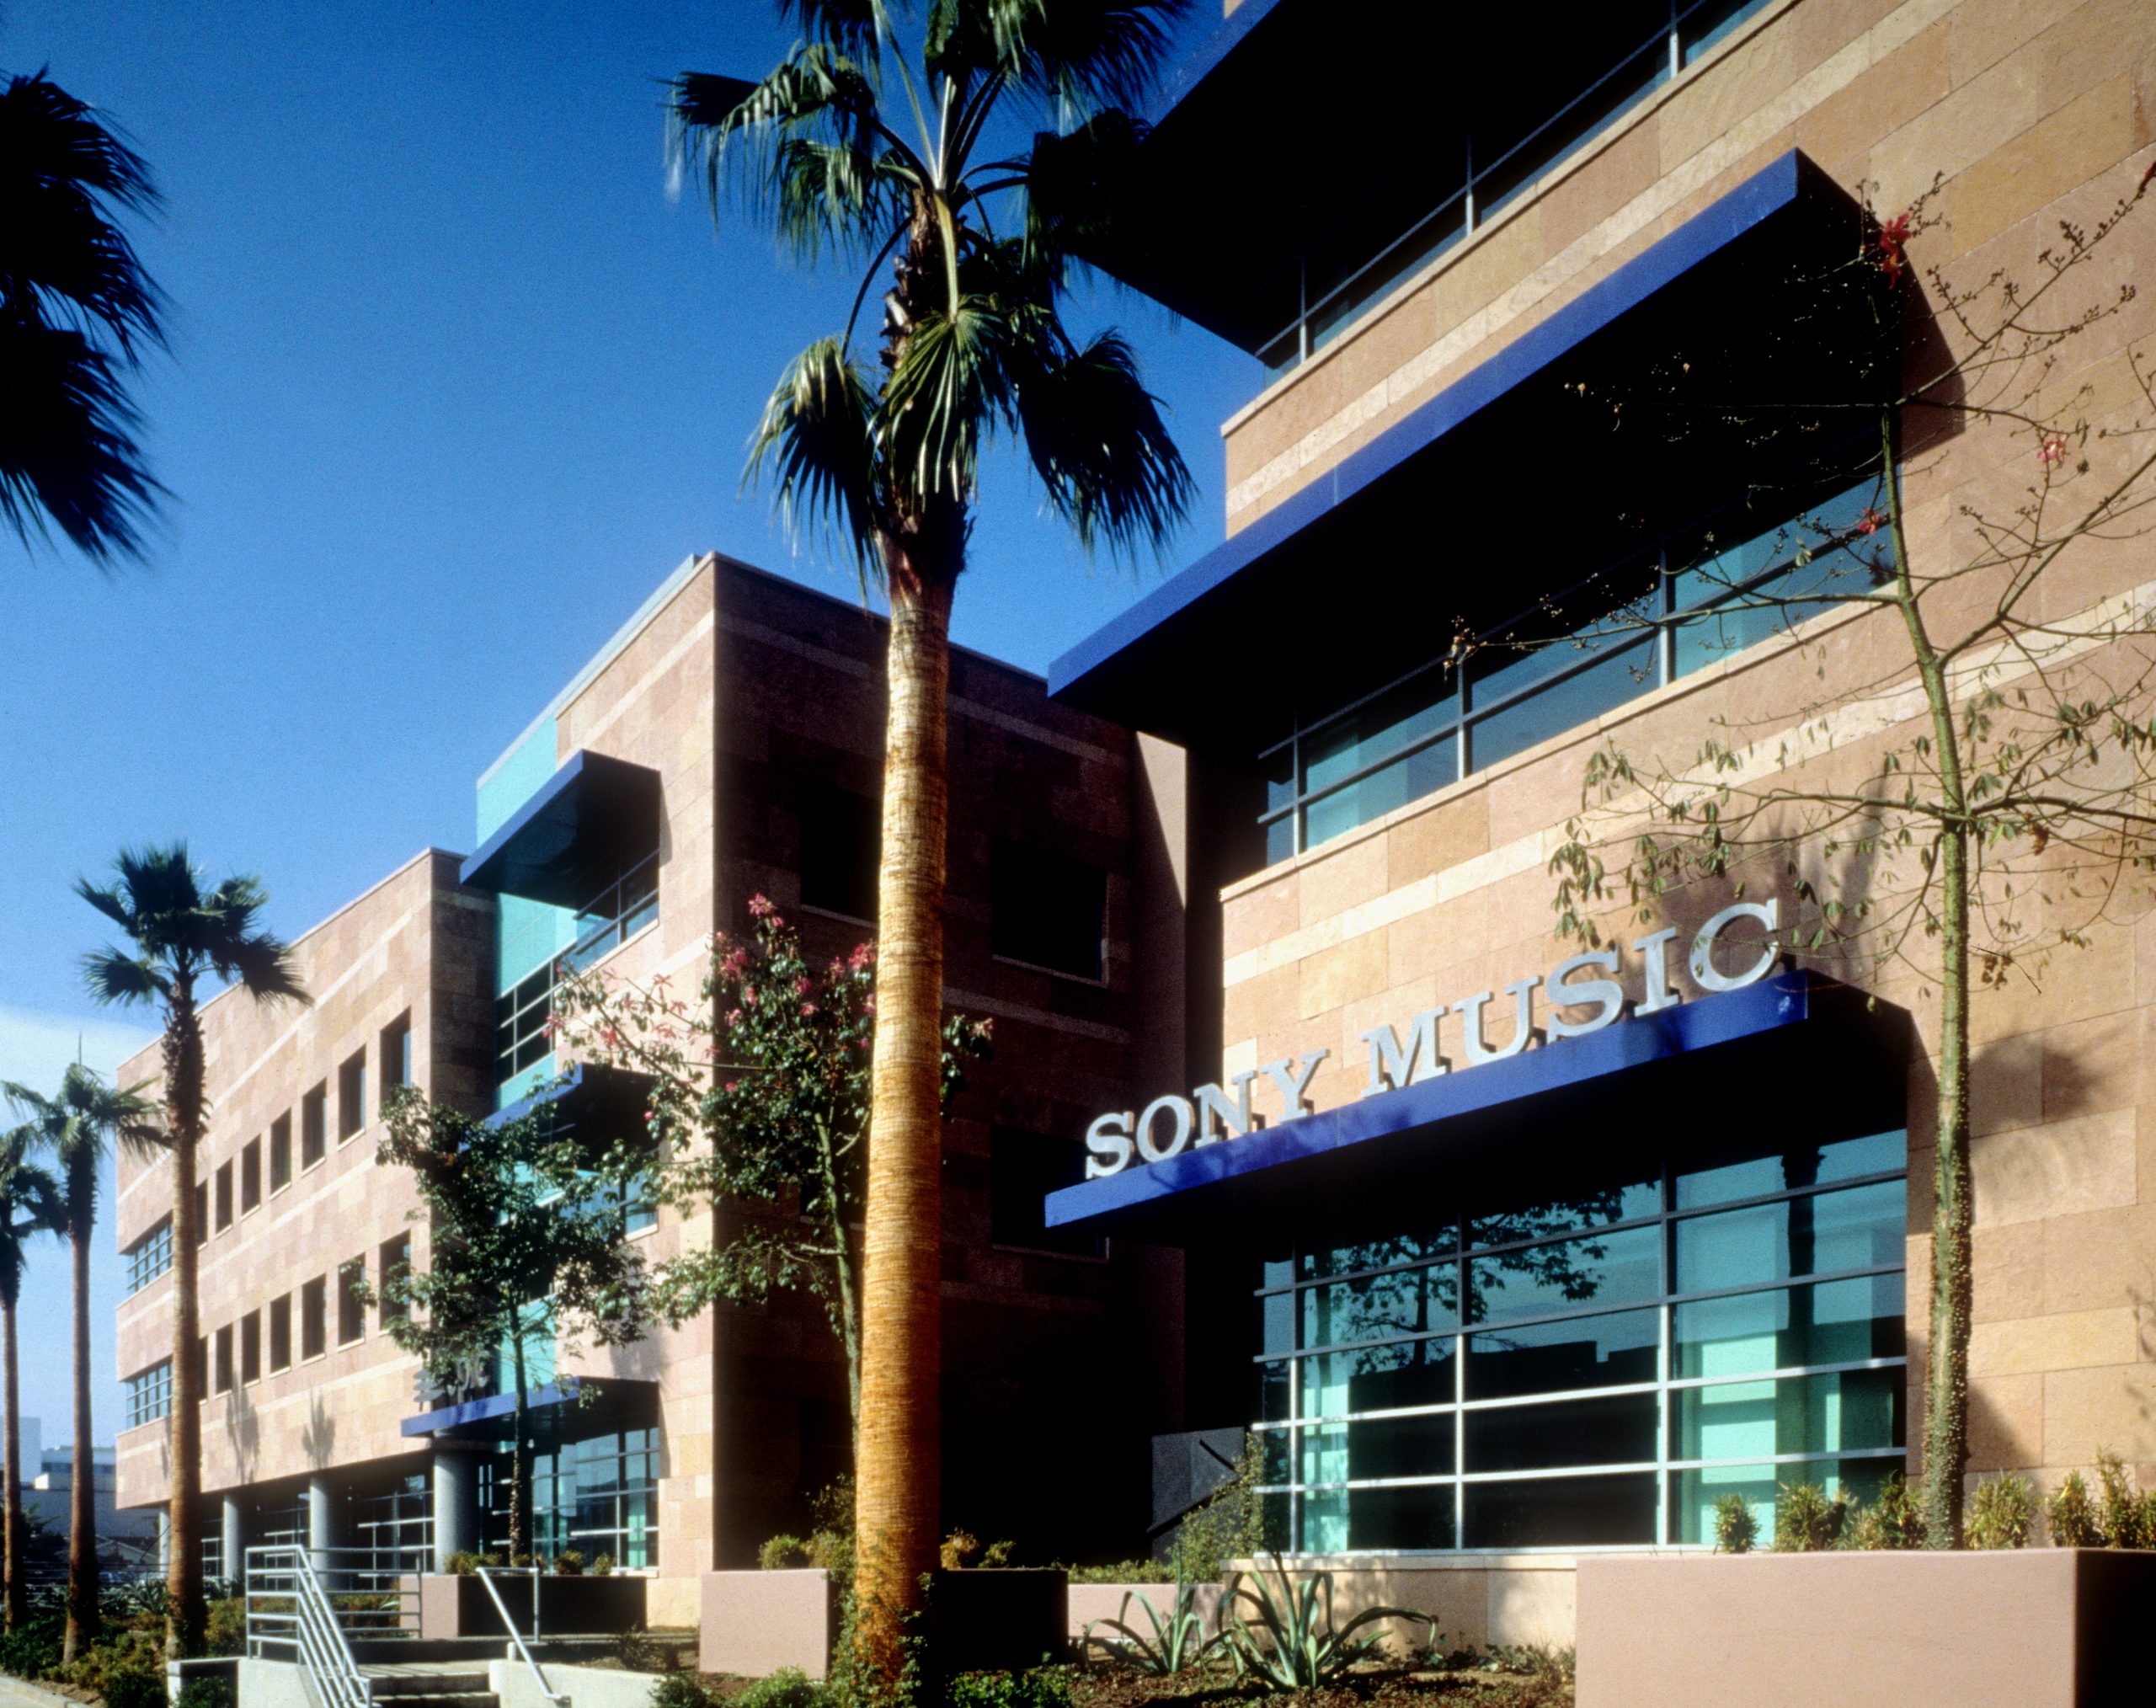 Sony Music exterior with sign